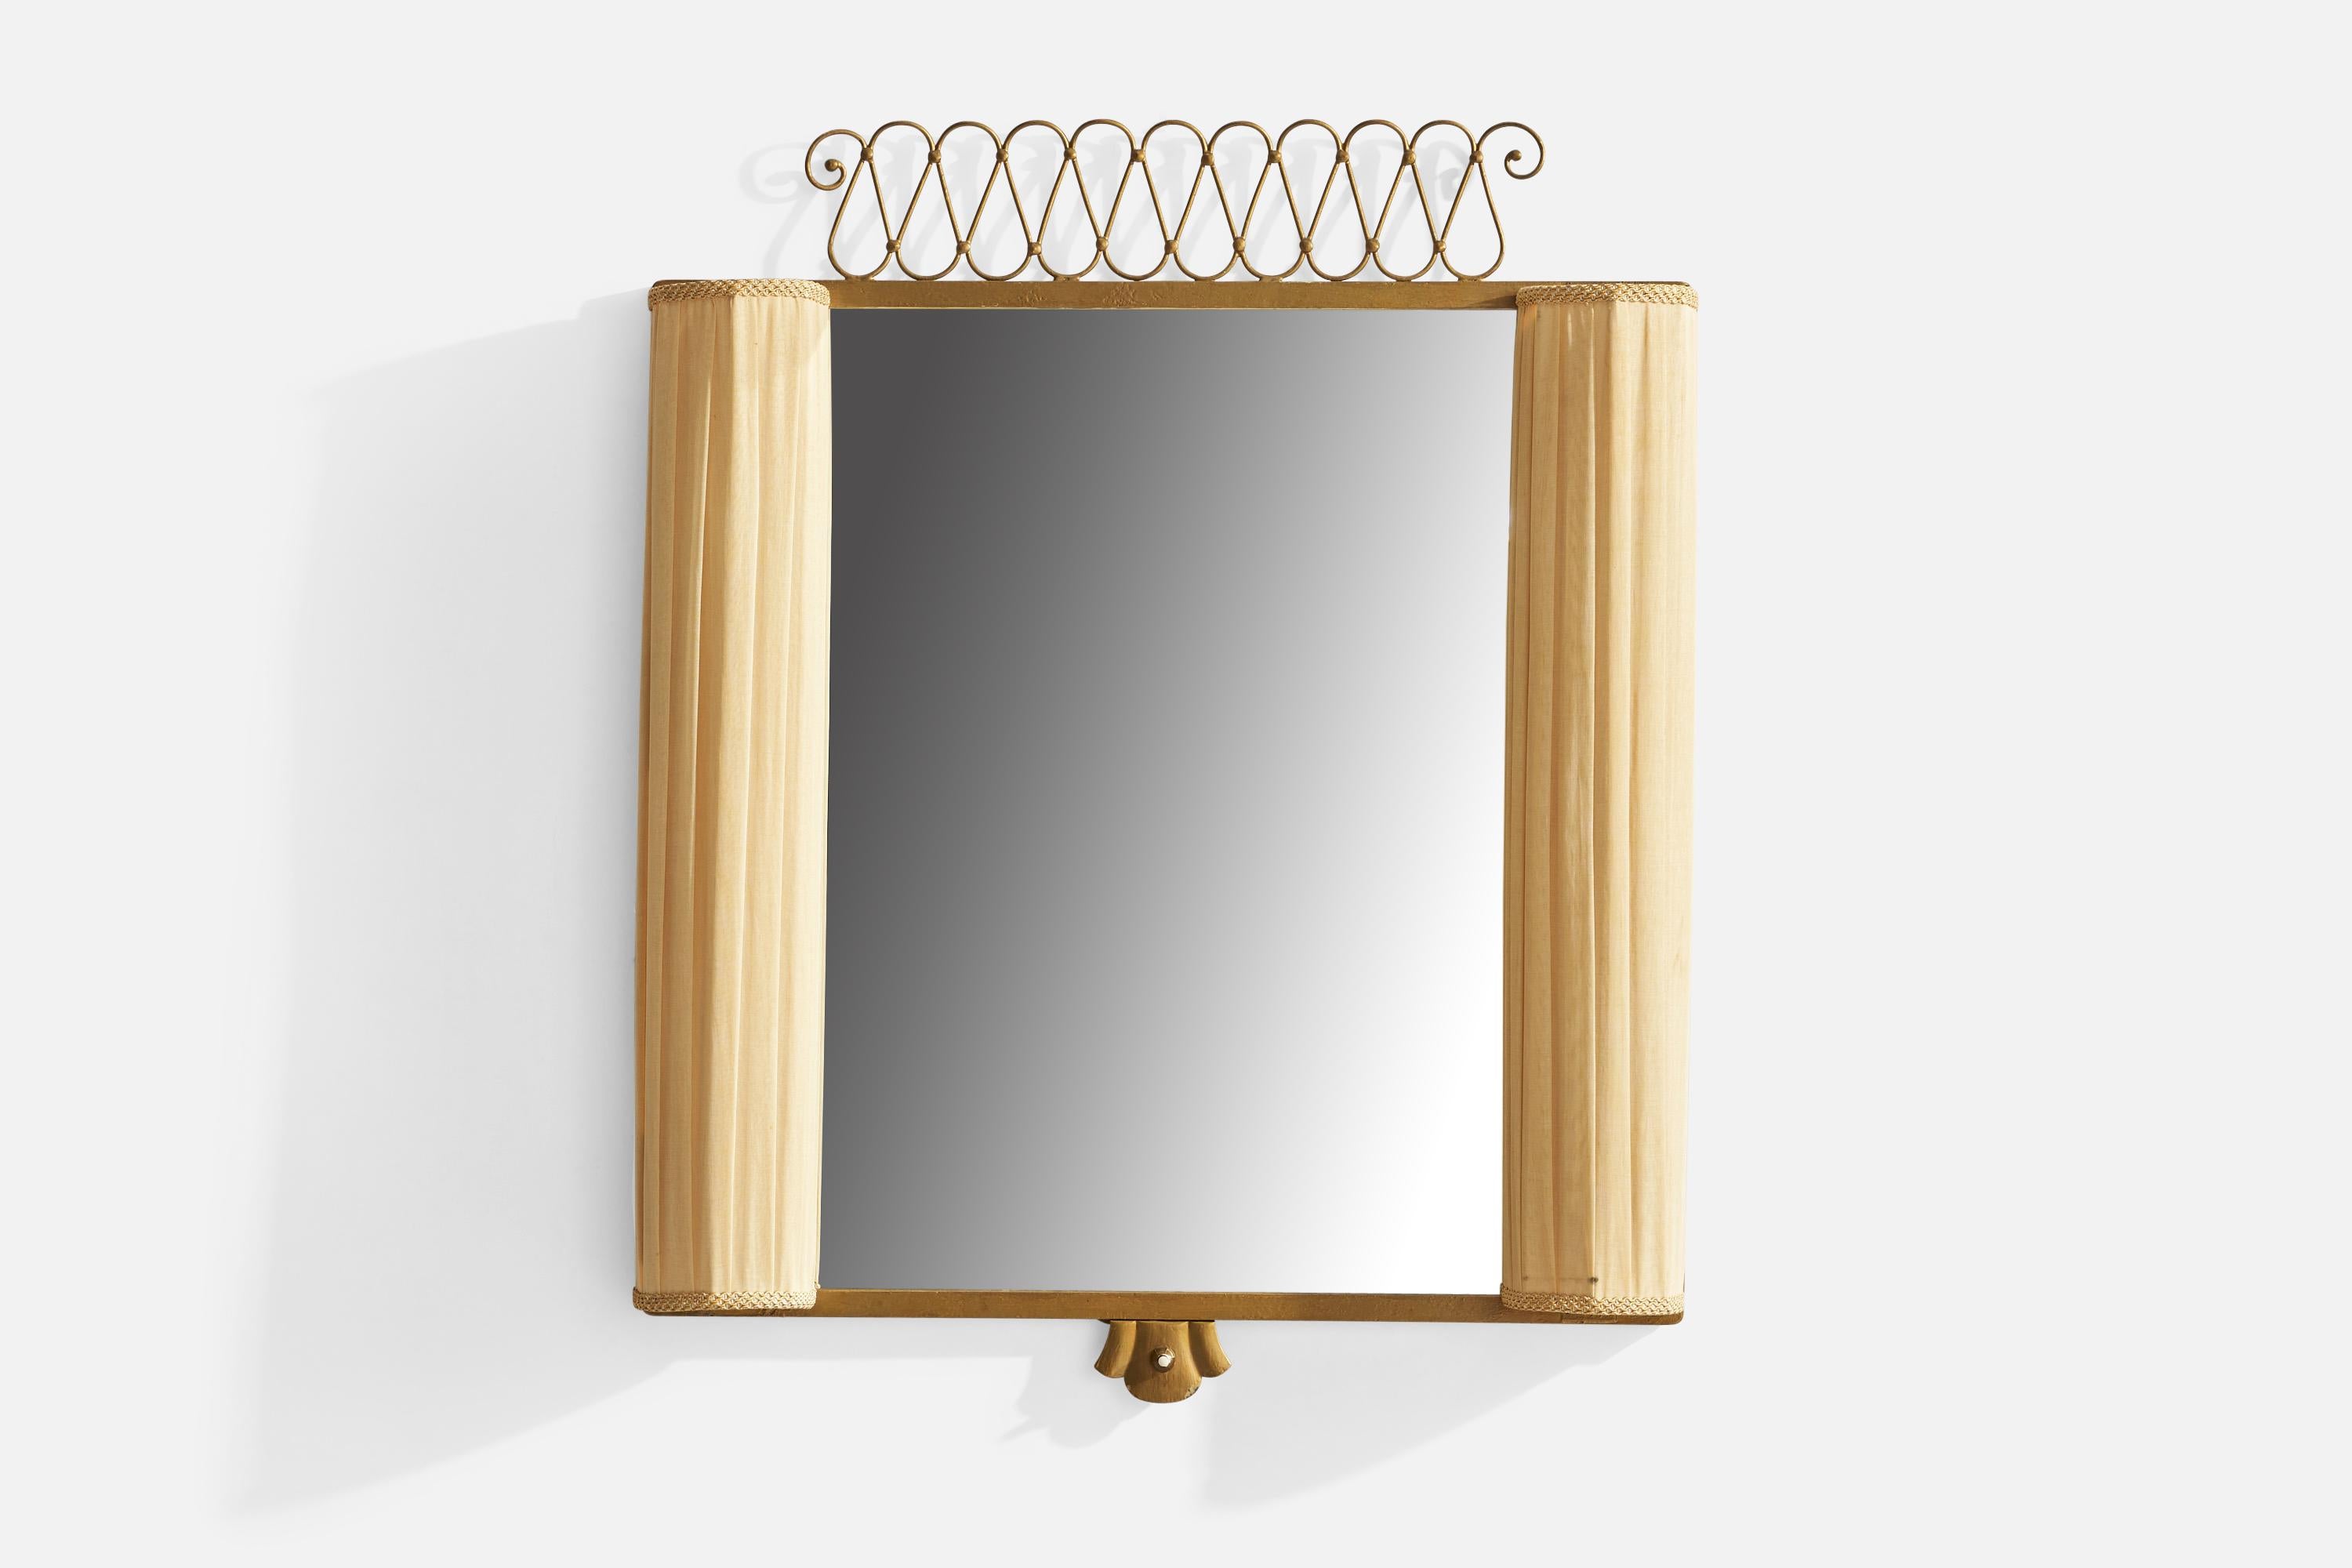 An illuminated beige fabric and gold-painted metal wall mirror designed and produced in Sweden, 1930s.